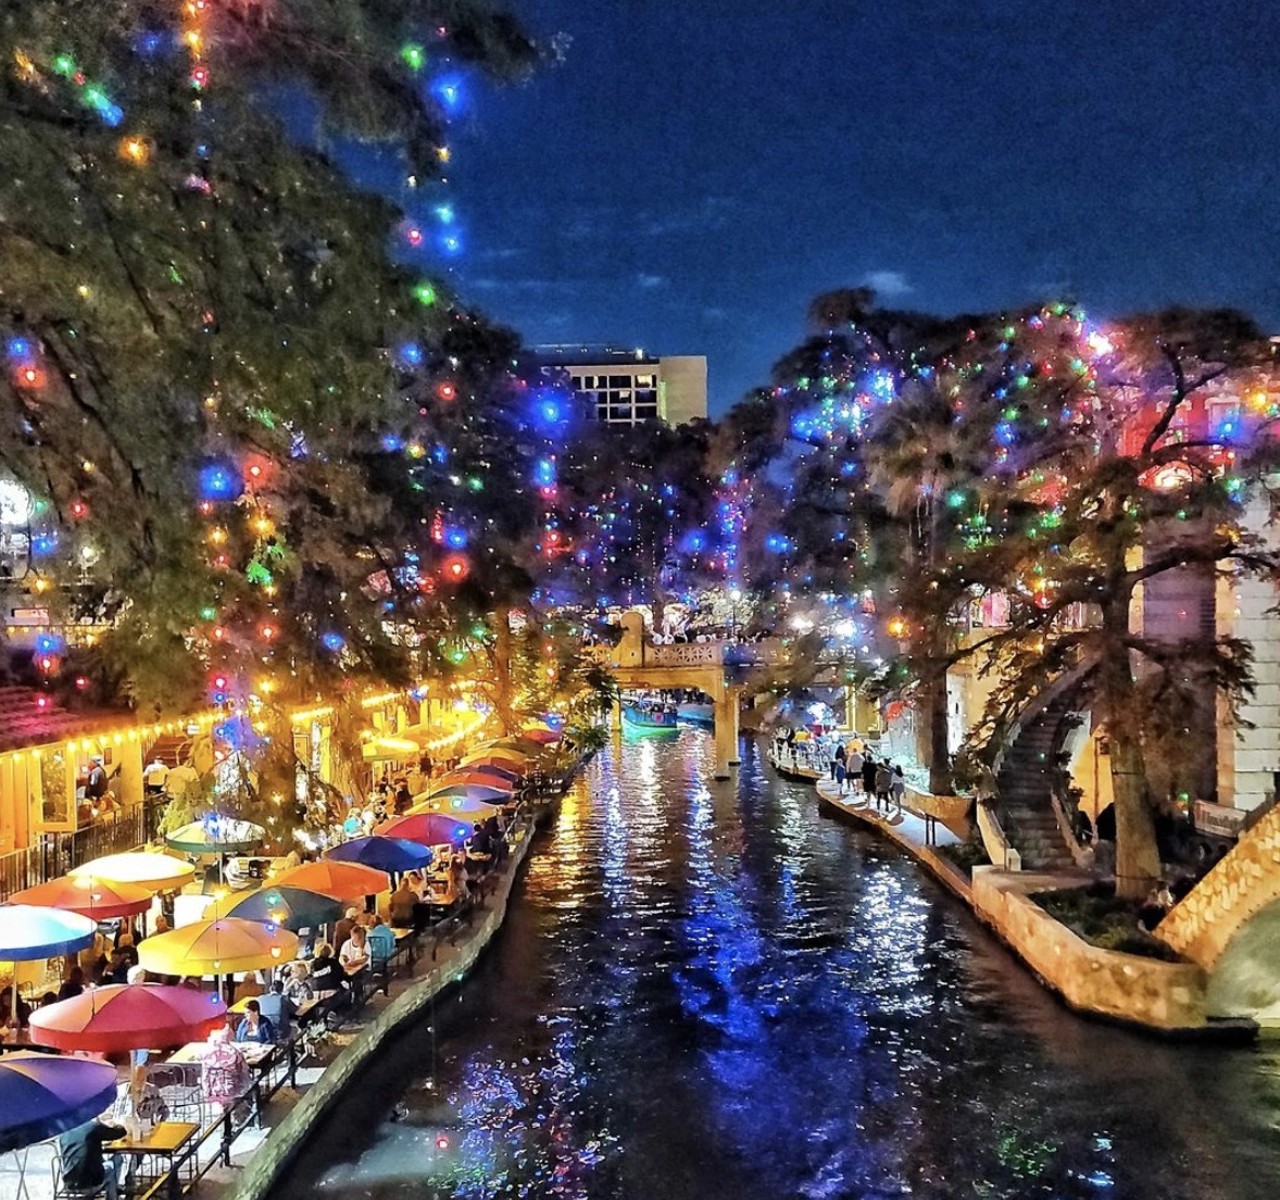 Stroll the River Walk to look at the lights
You don't have to be a tourist to wander the River Walk and take in the lights. It's romantic, and your out-of-town guests will expect a tour.
Photo via Instagram / ingridalamode